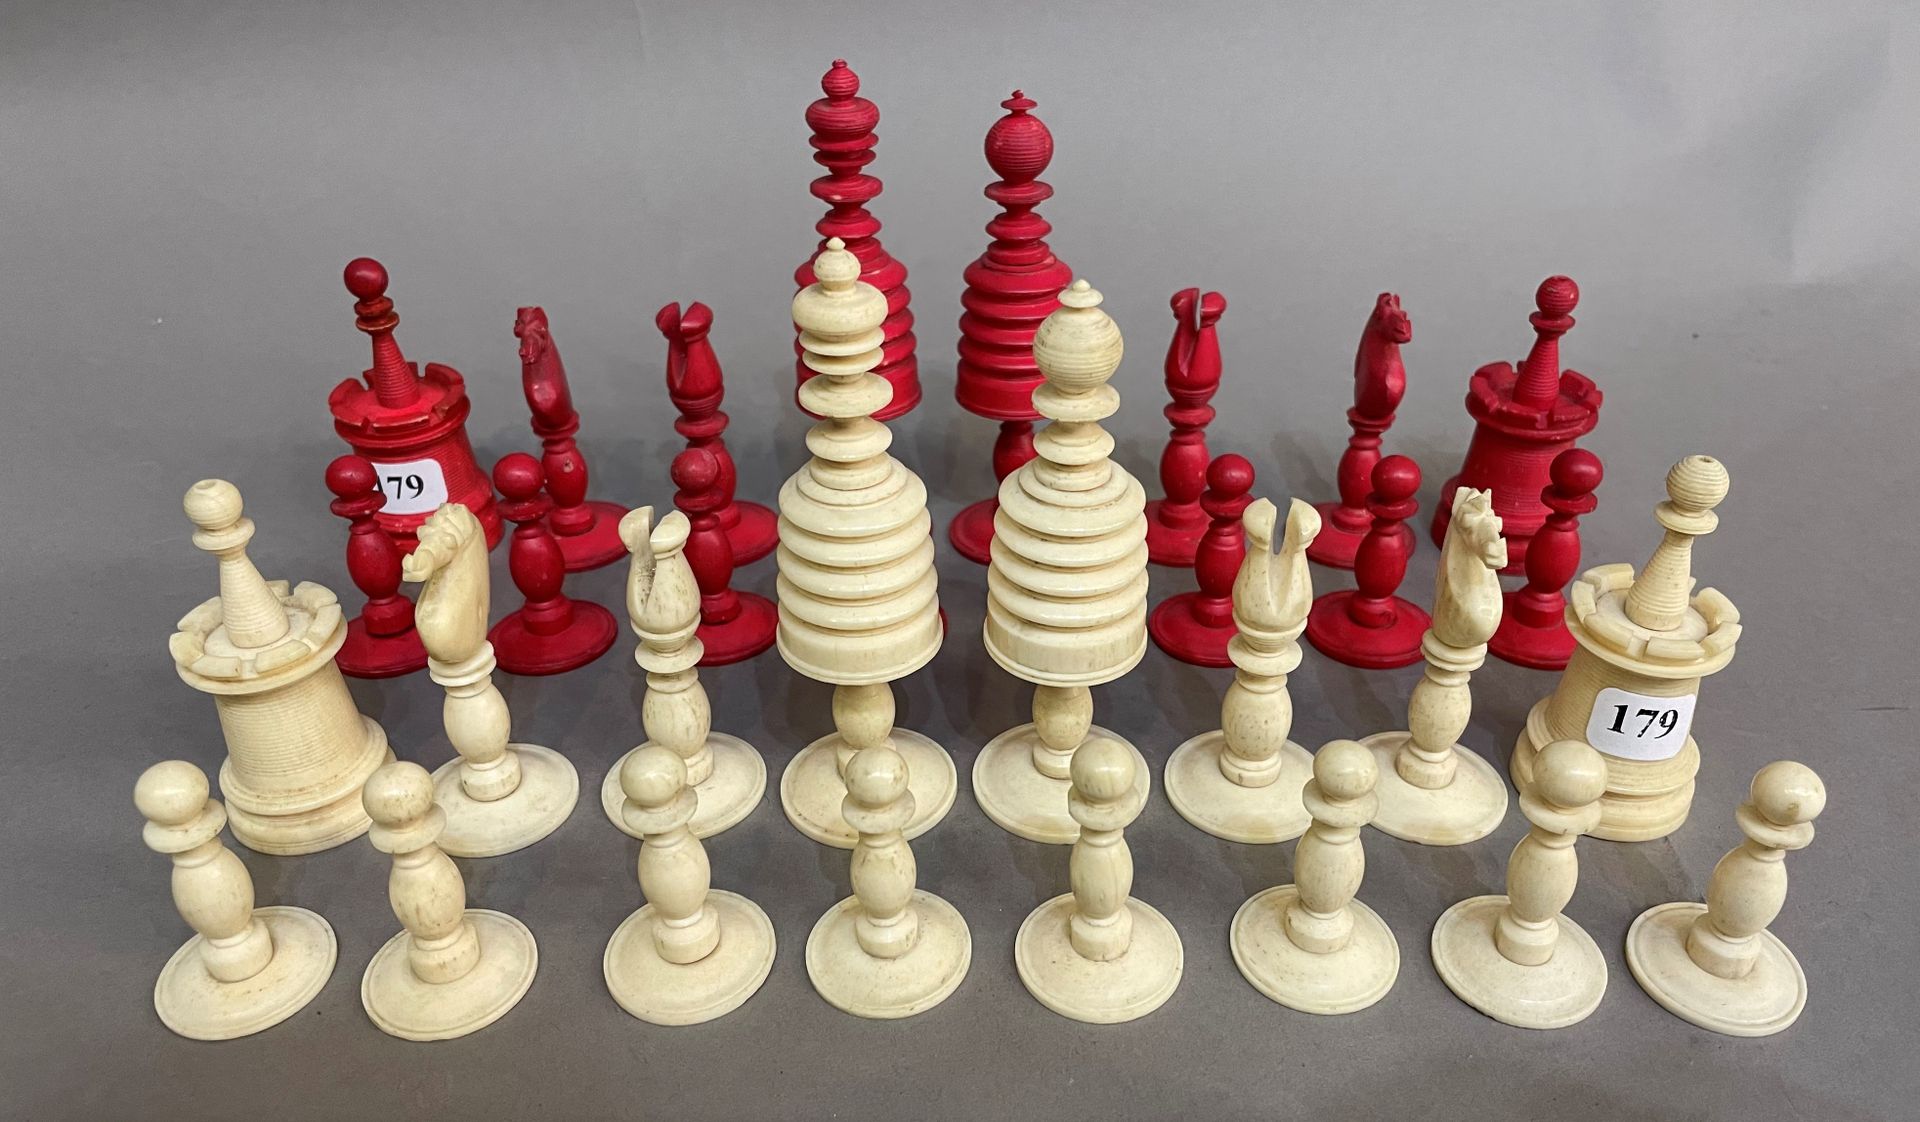 Null Chess set in carved bone

19TH CENTURY

H. Tower 7 cm

H. King 9,5 cm